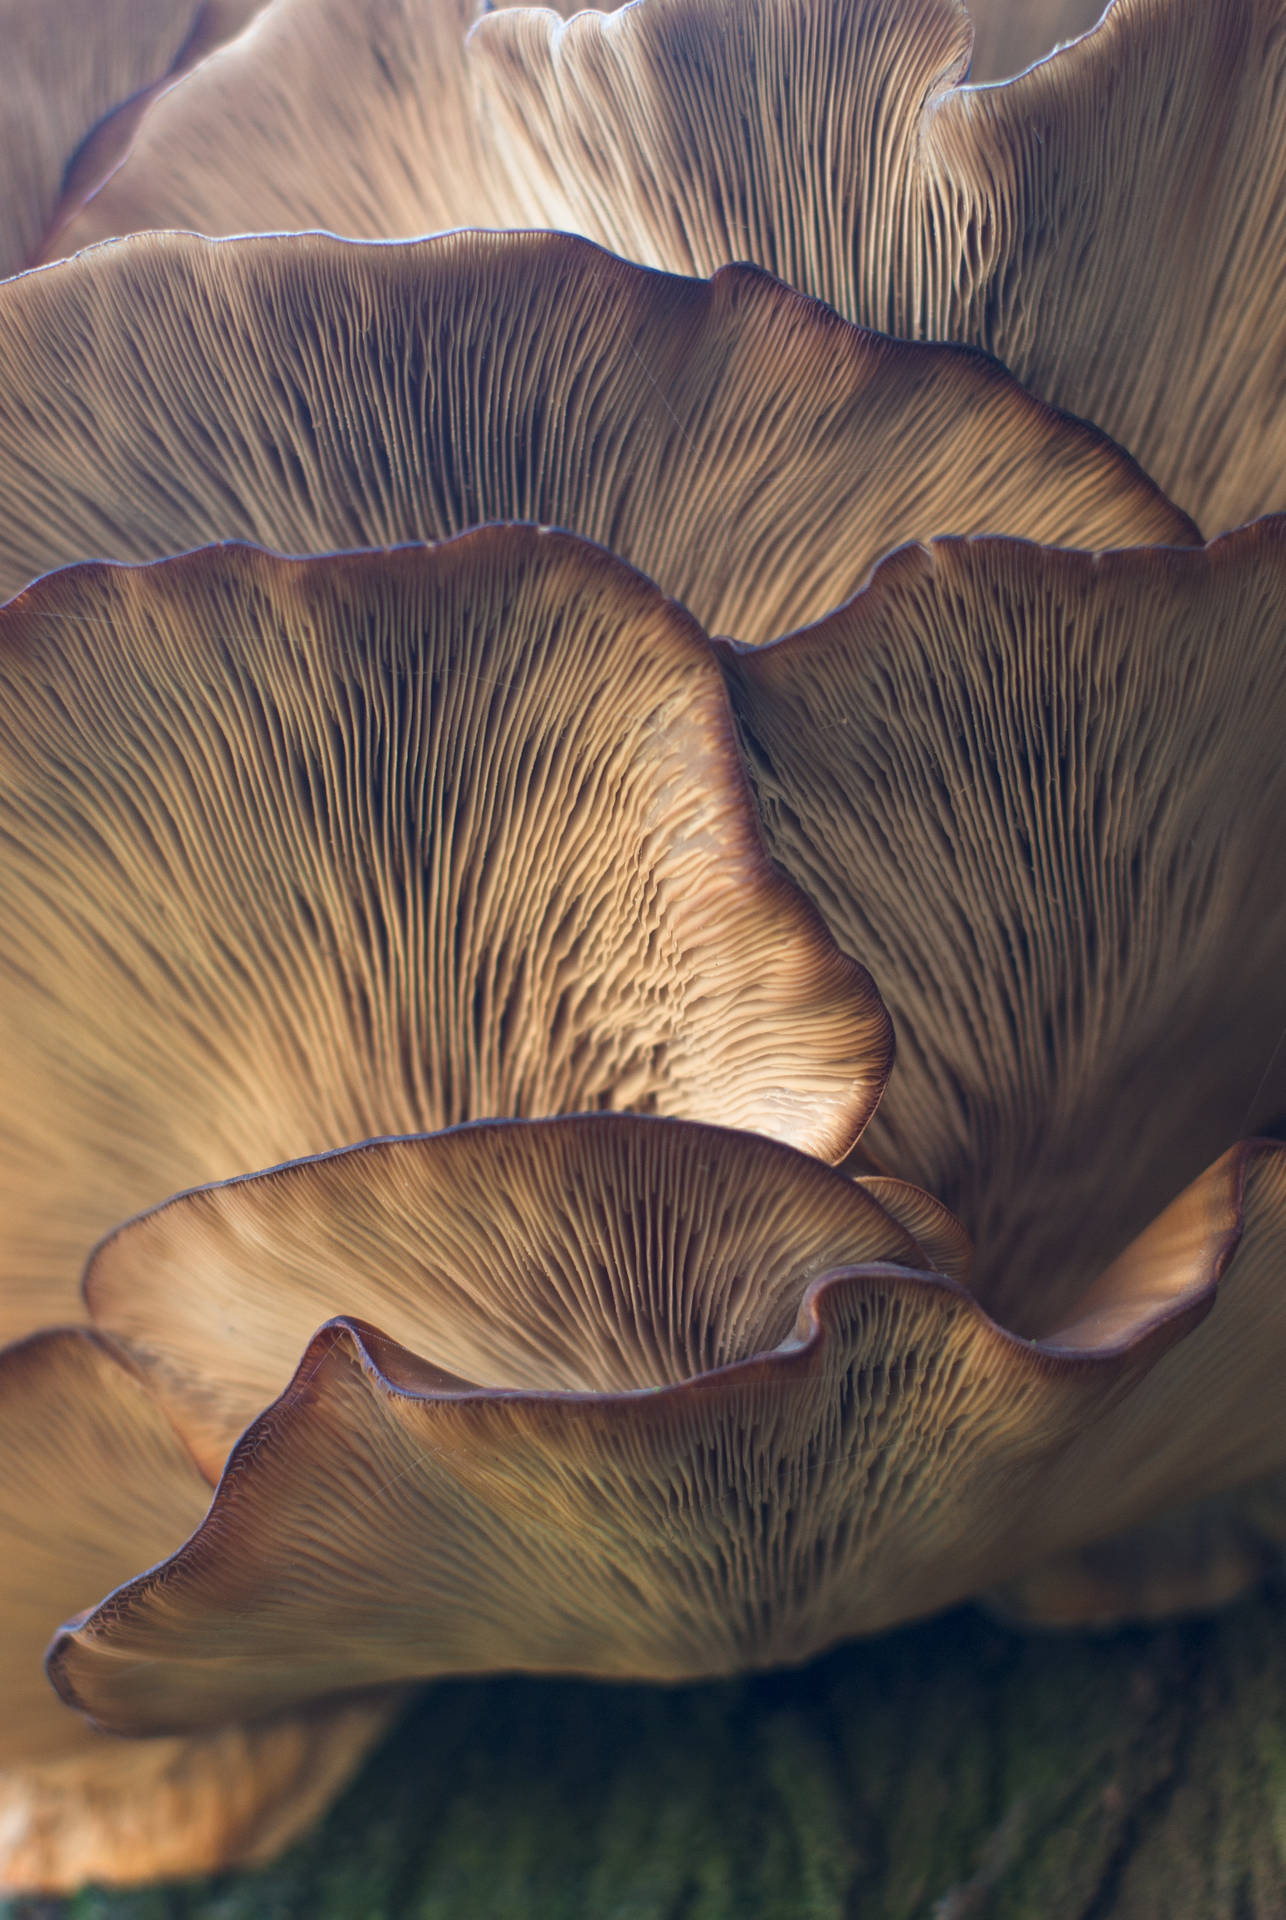 Mushroom 2559X3822 Wallpaper and Background Image